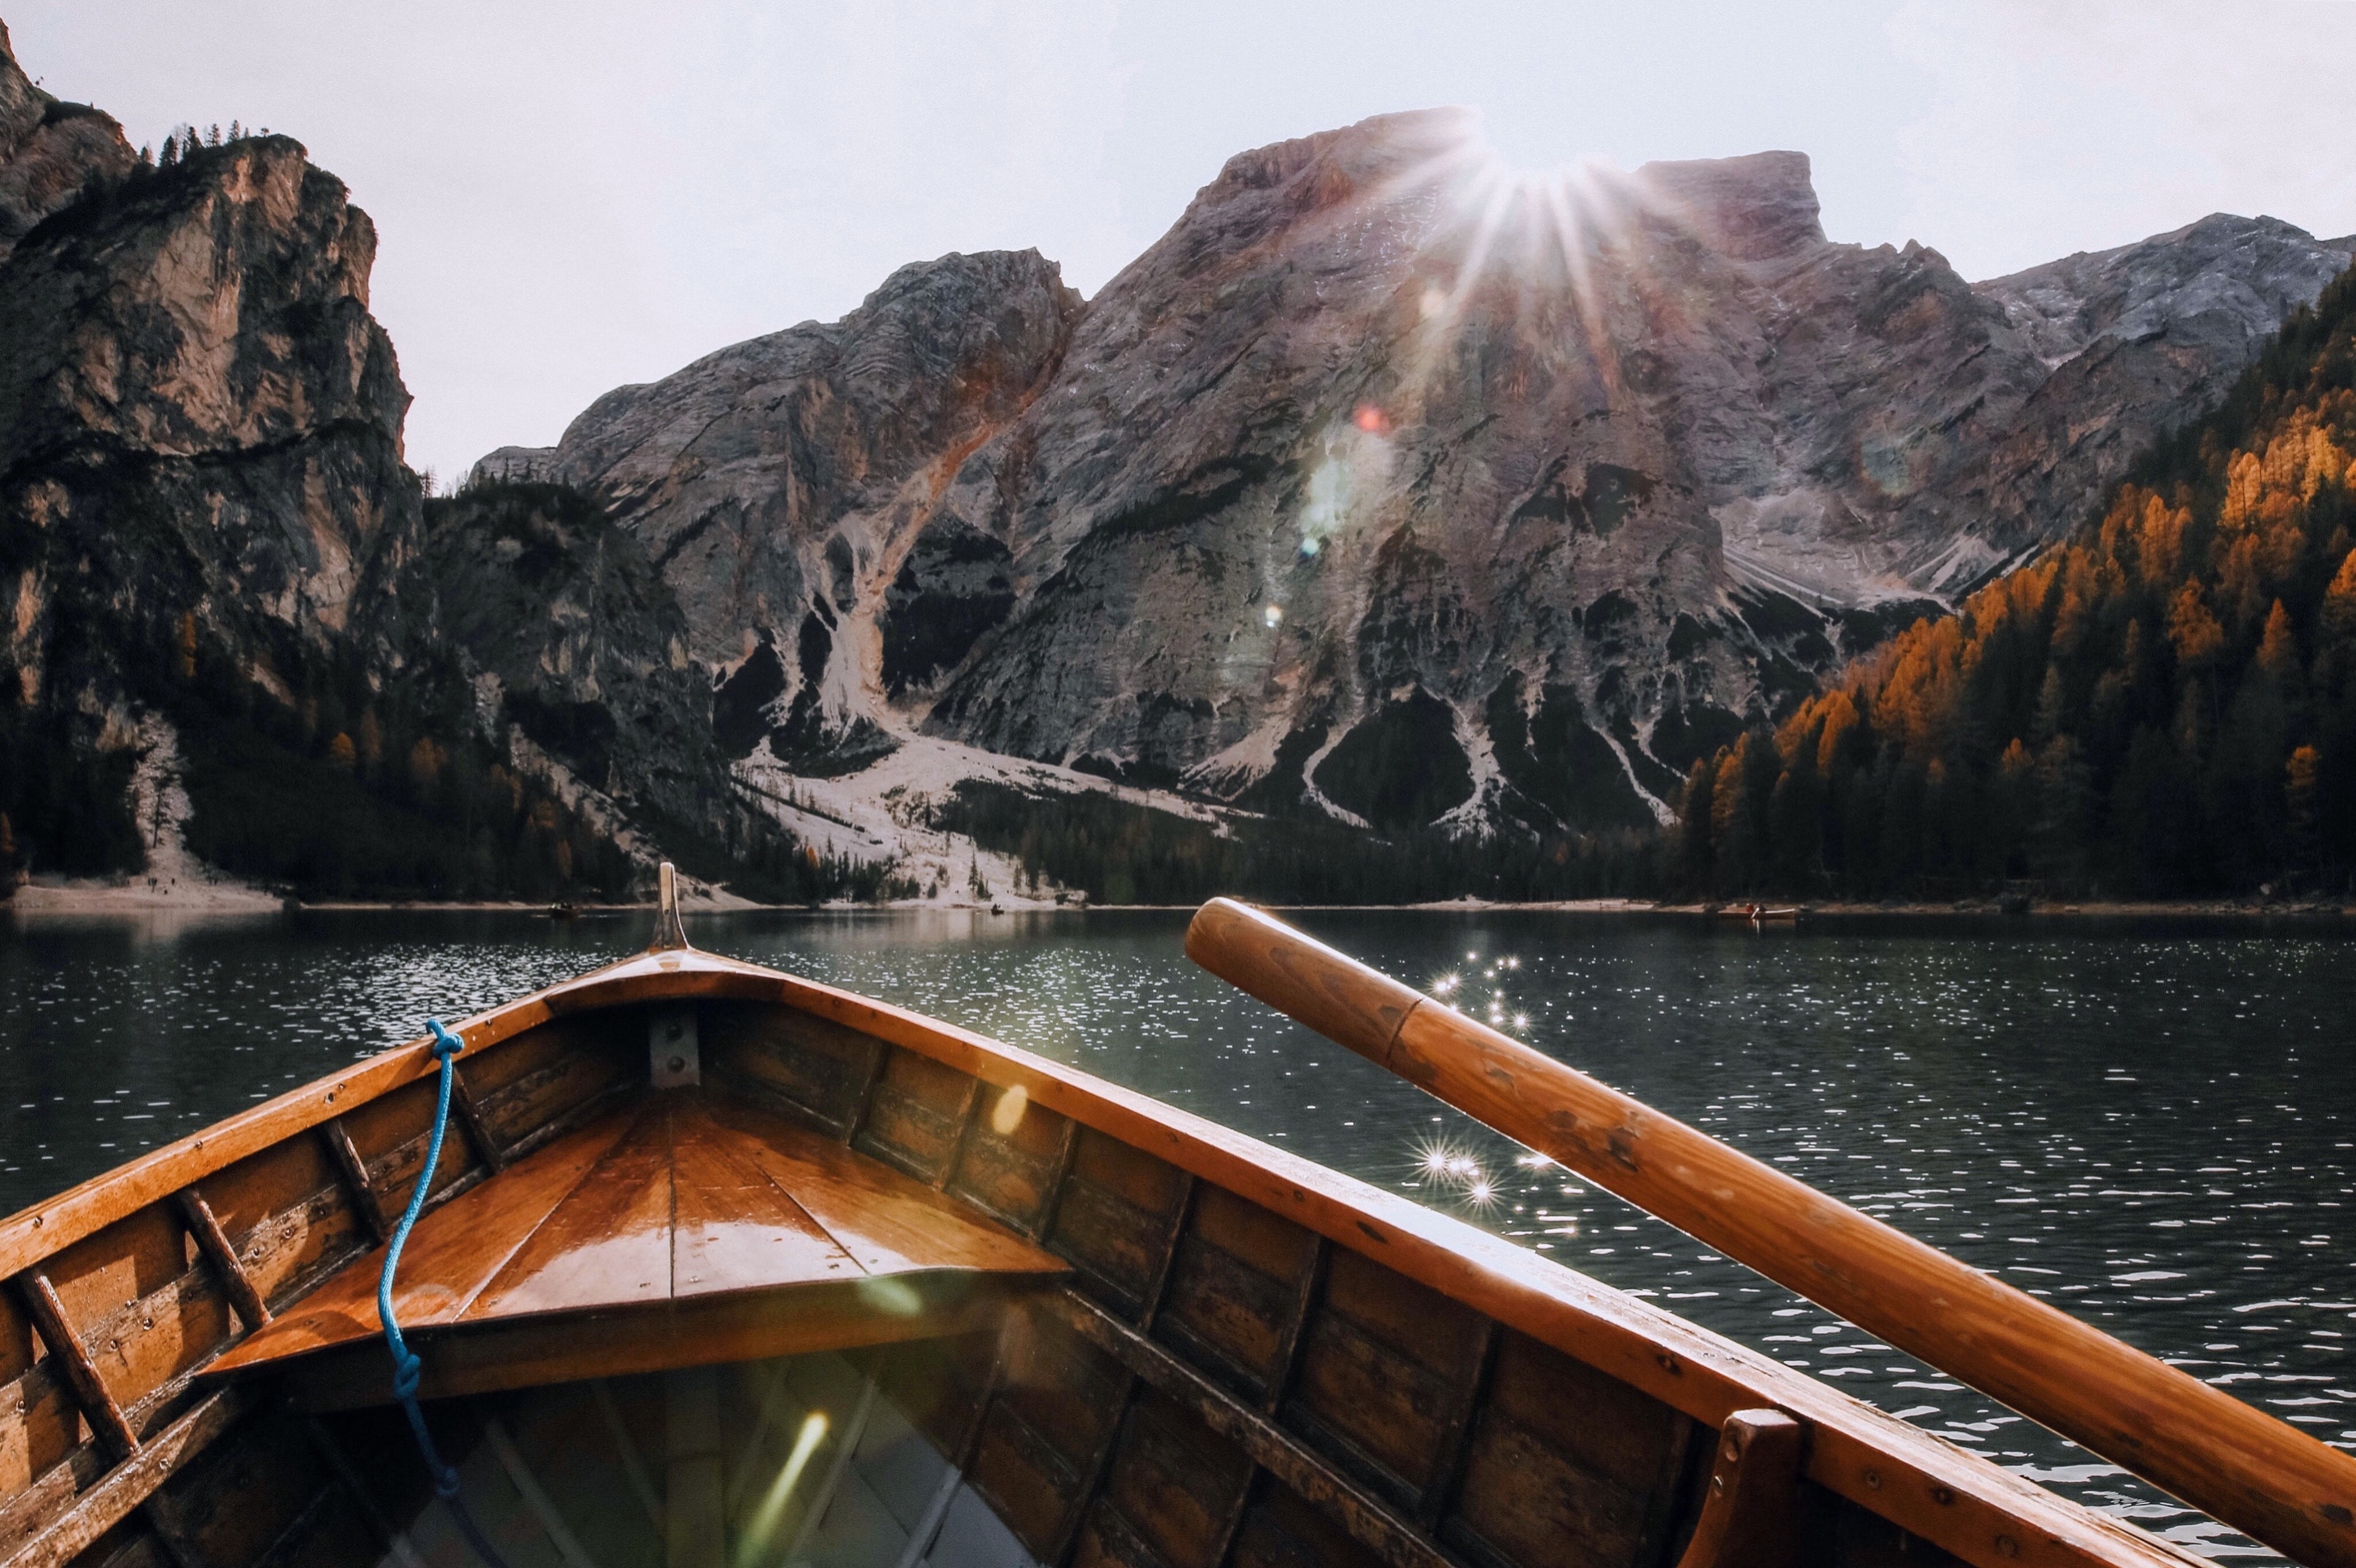 Brown canoe in the body of water near mountain photo